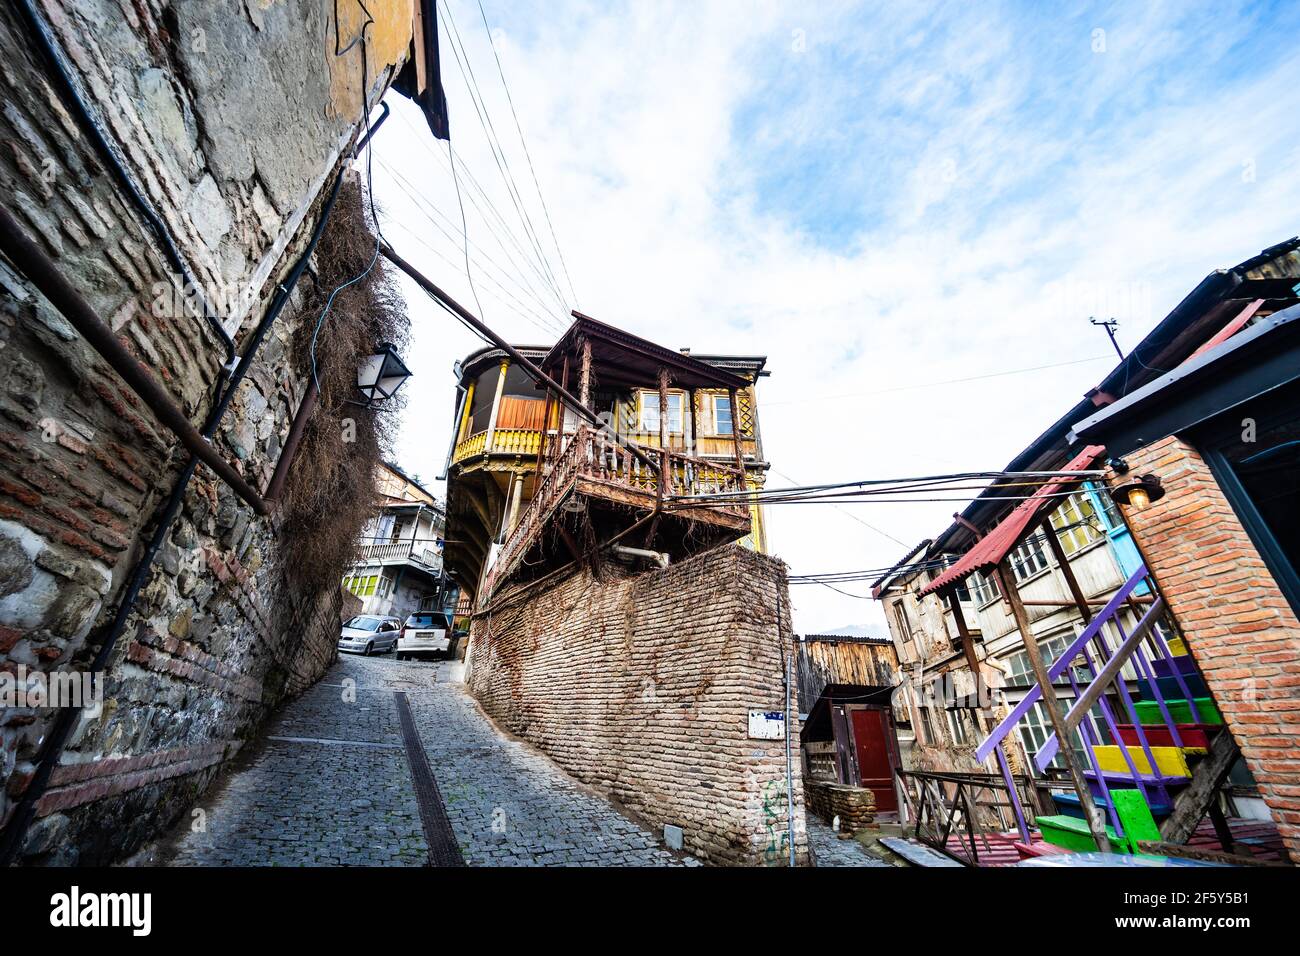 Old Tbilisi with narrow street and red roofs Stock Photo